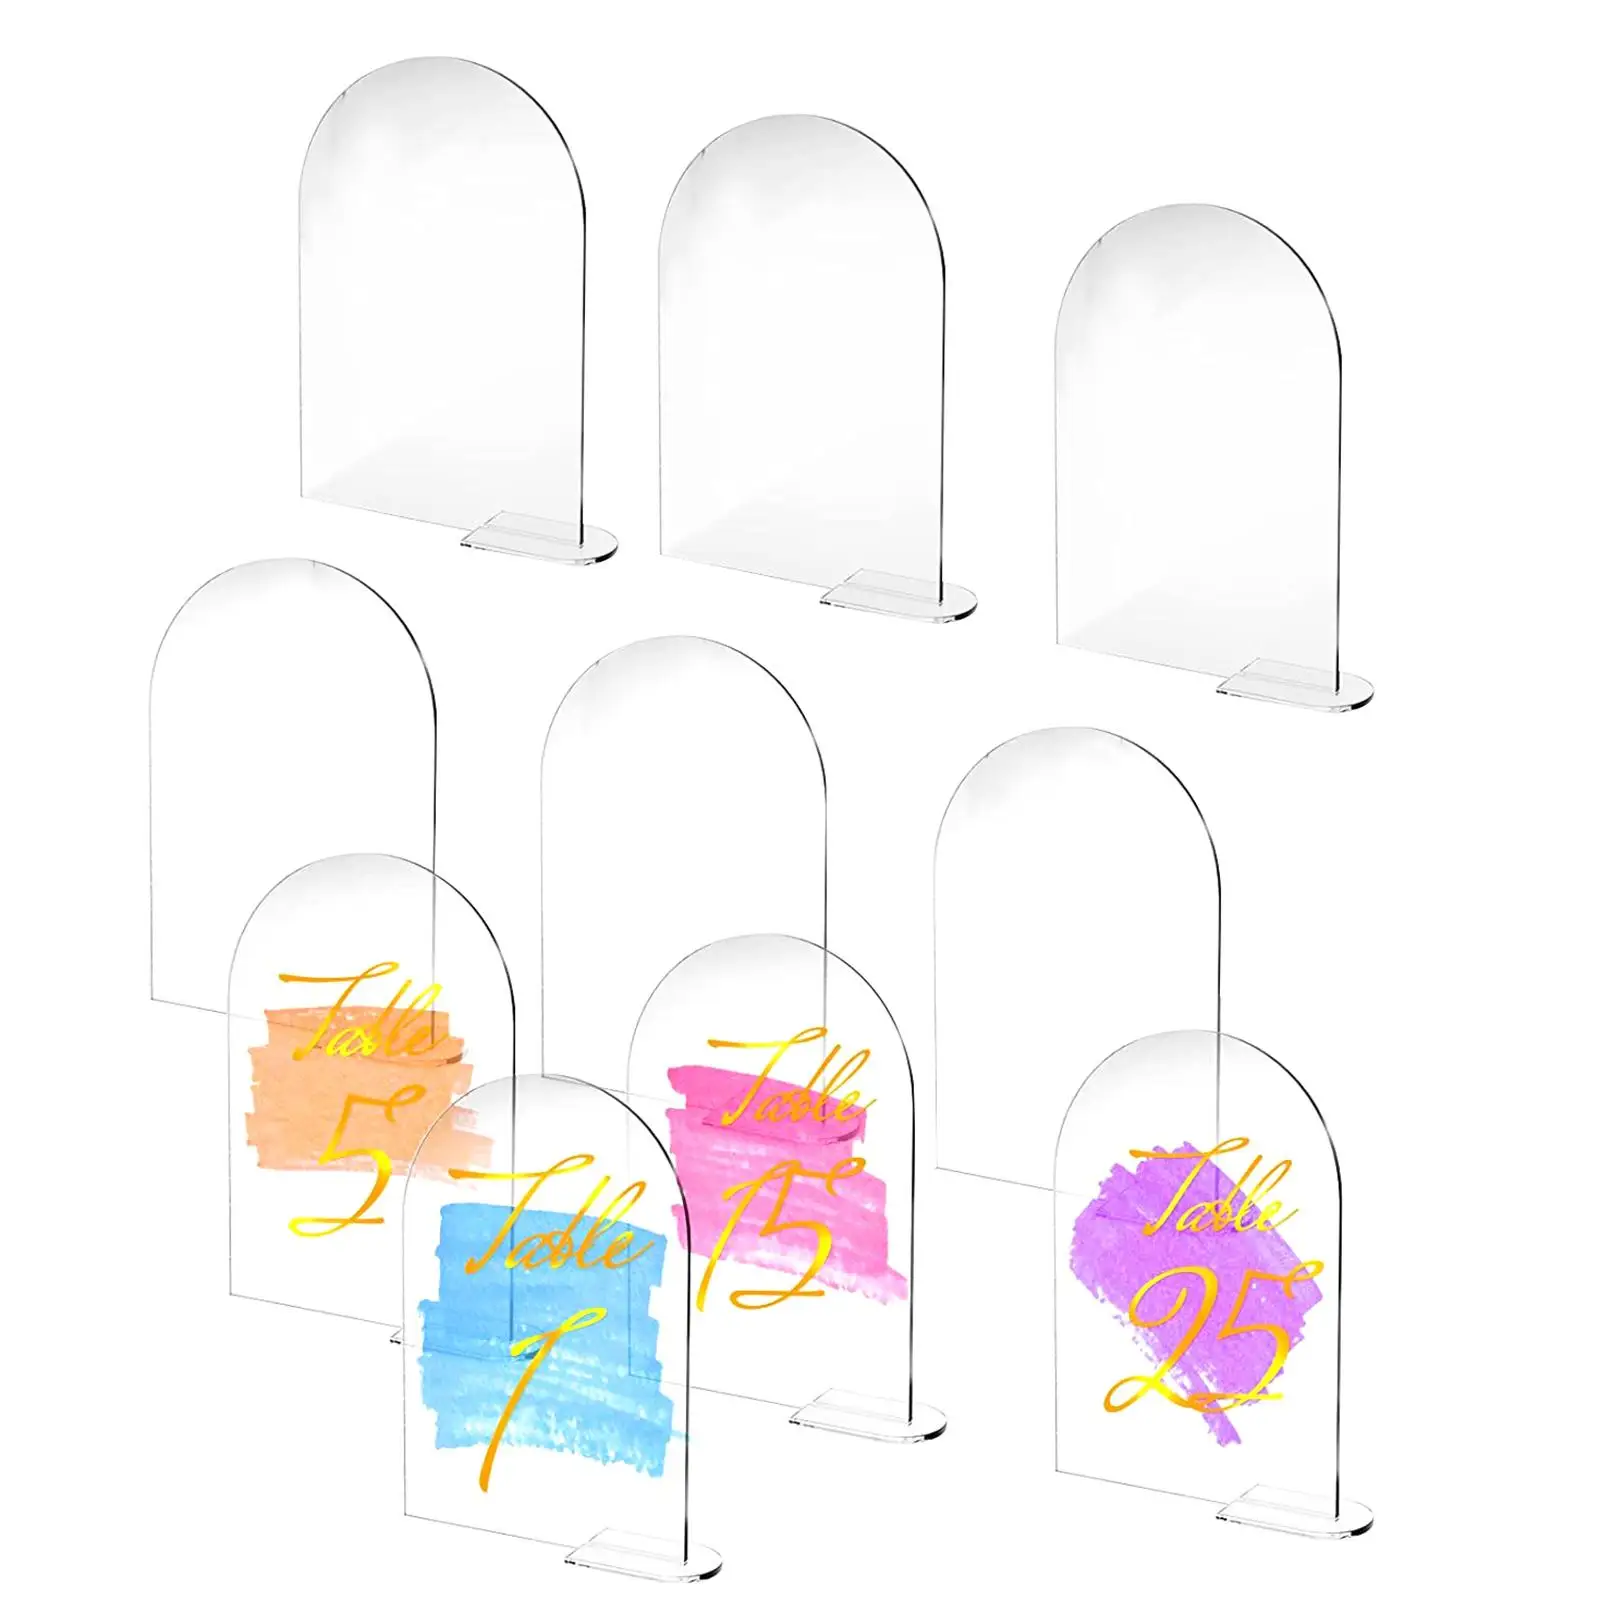 10x Acrylic Place Cards Seating Chart Card with Stand Arched Table Numbers Signs Acrylic Plates for Party Reception Decoration